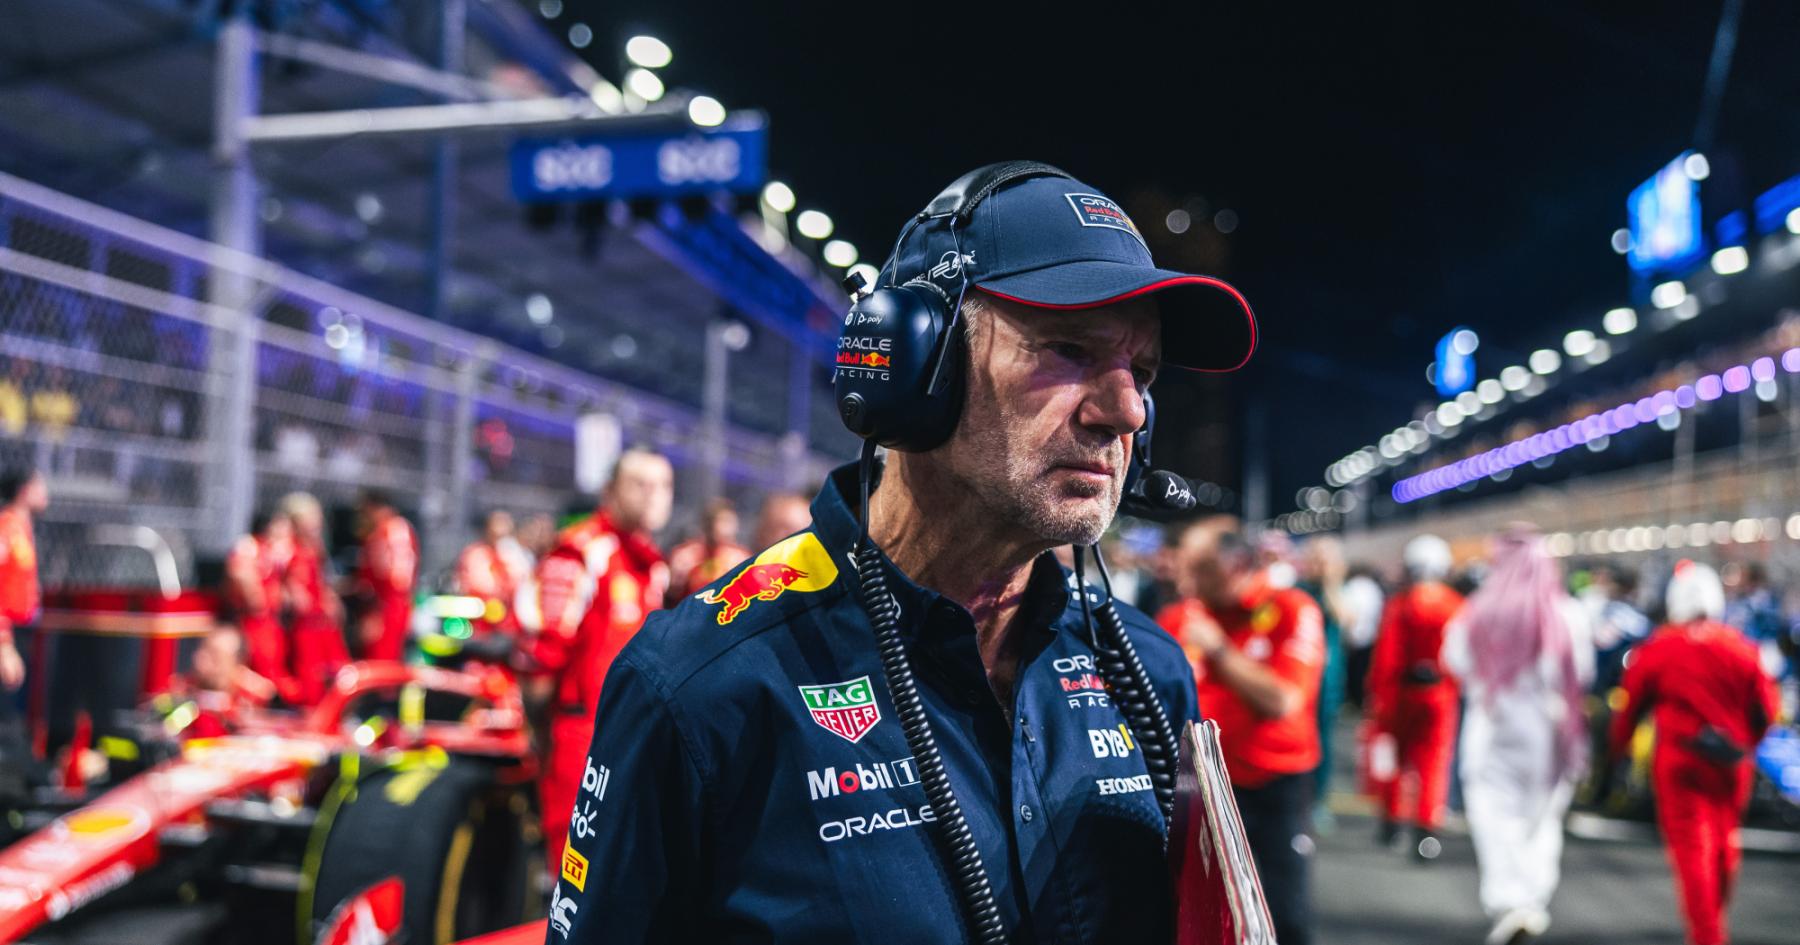 The End of an Era: Why Newey's Departure Signals a Shift in F1, and a Tribute to Racing Legends Senna and Ratzenberger